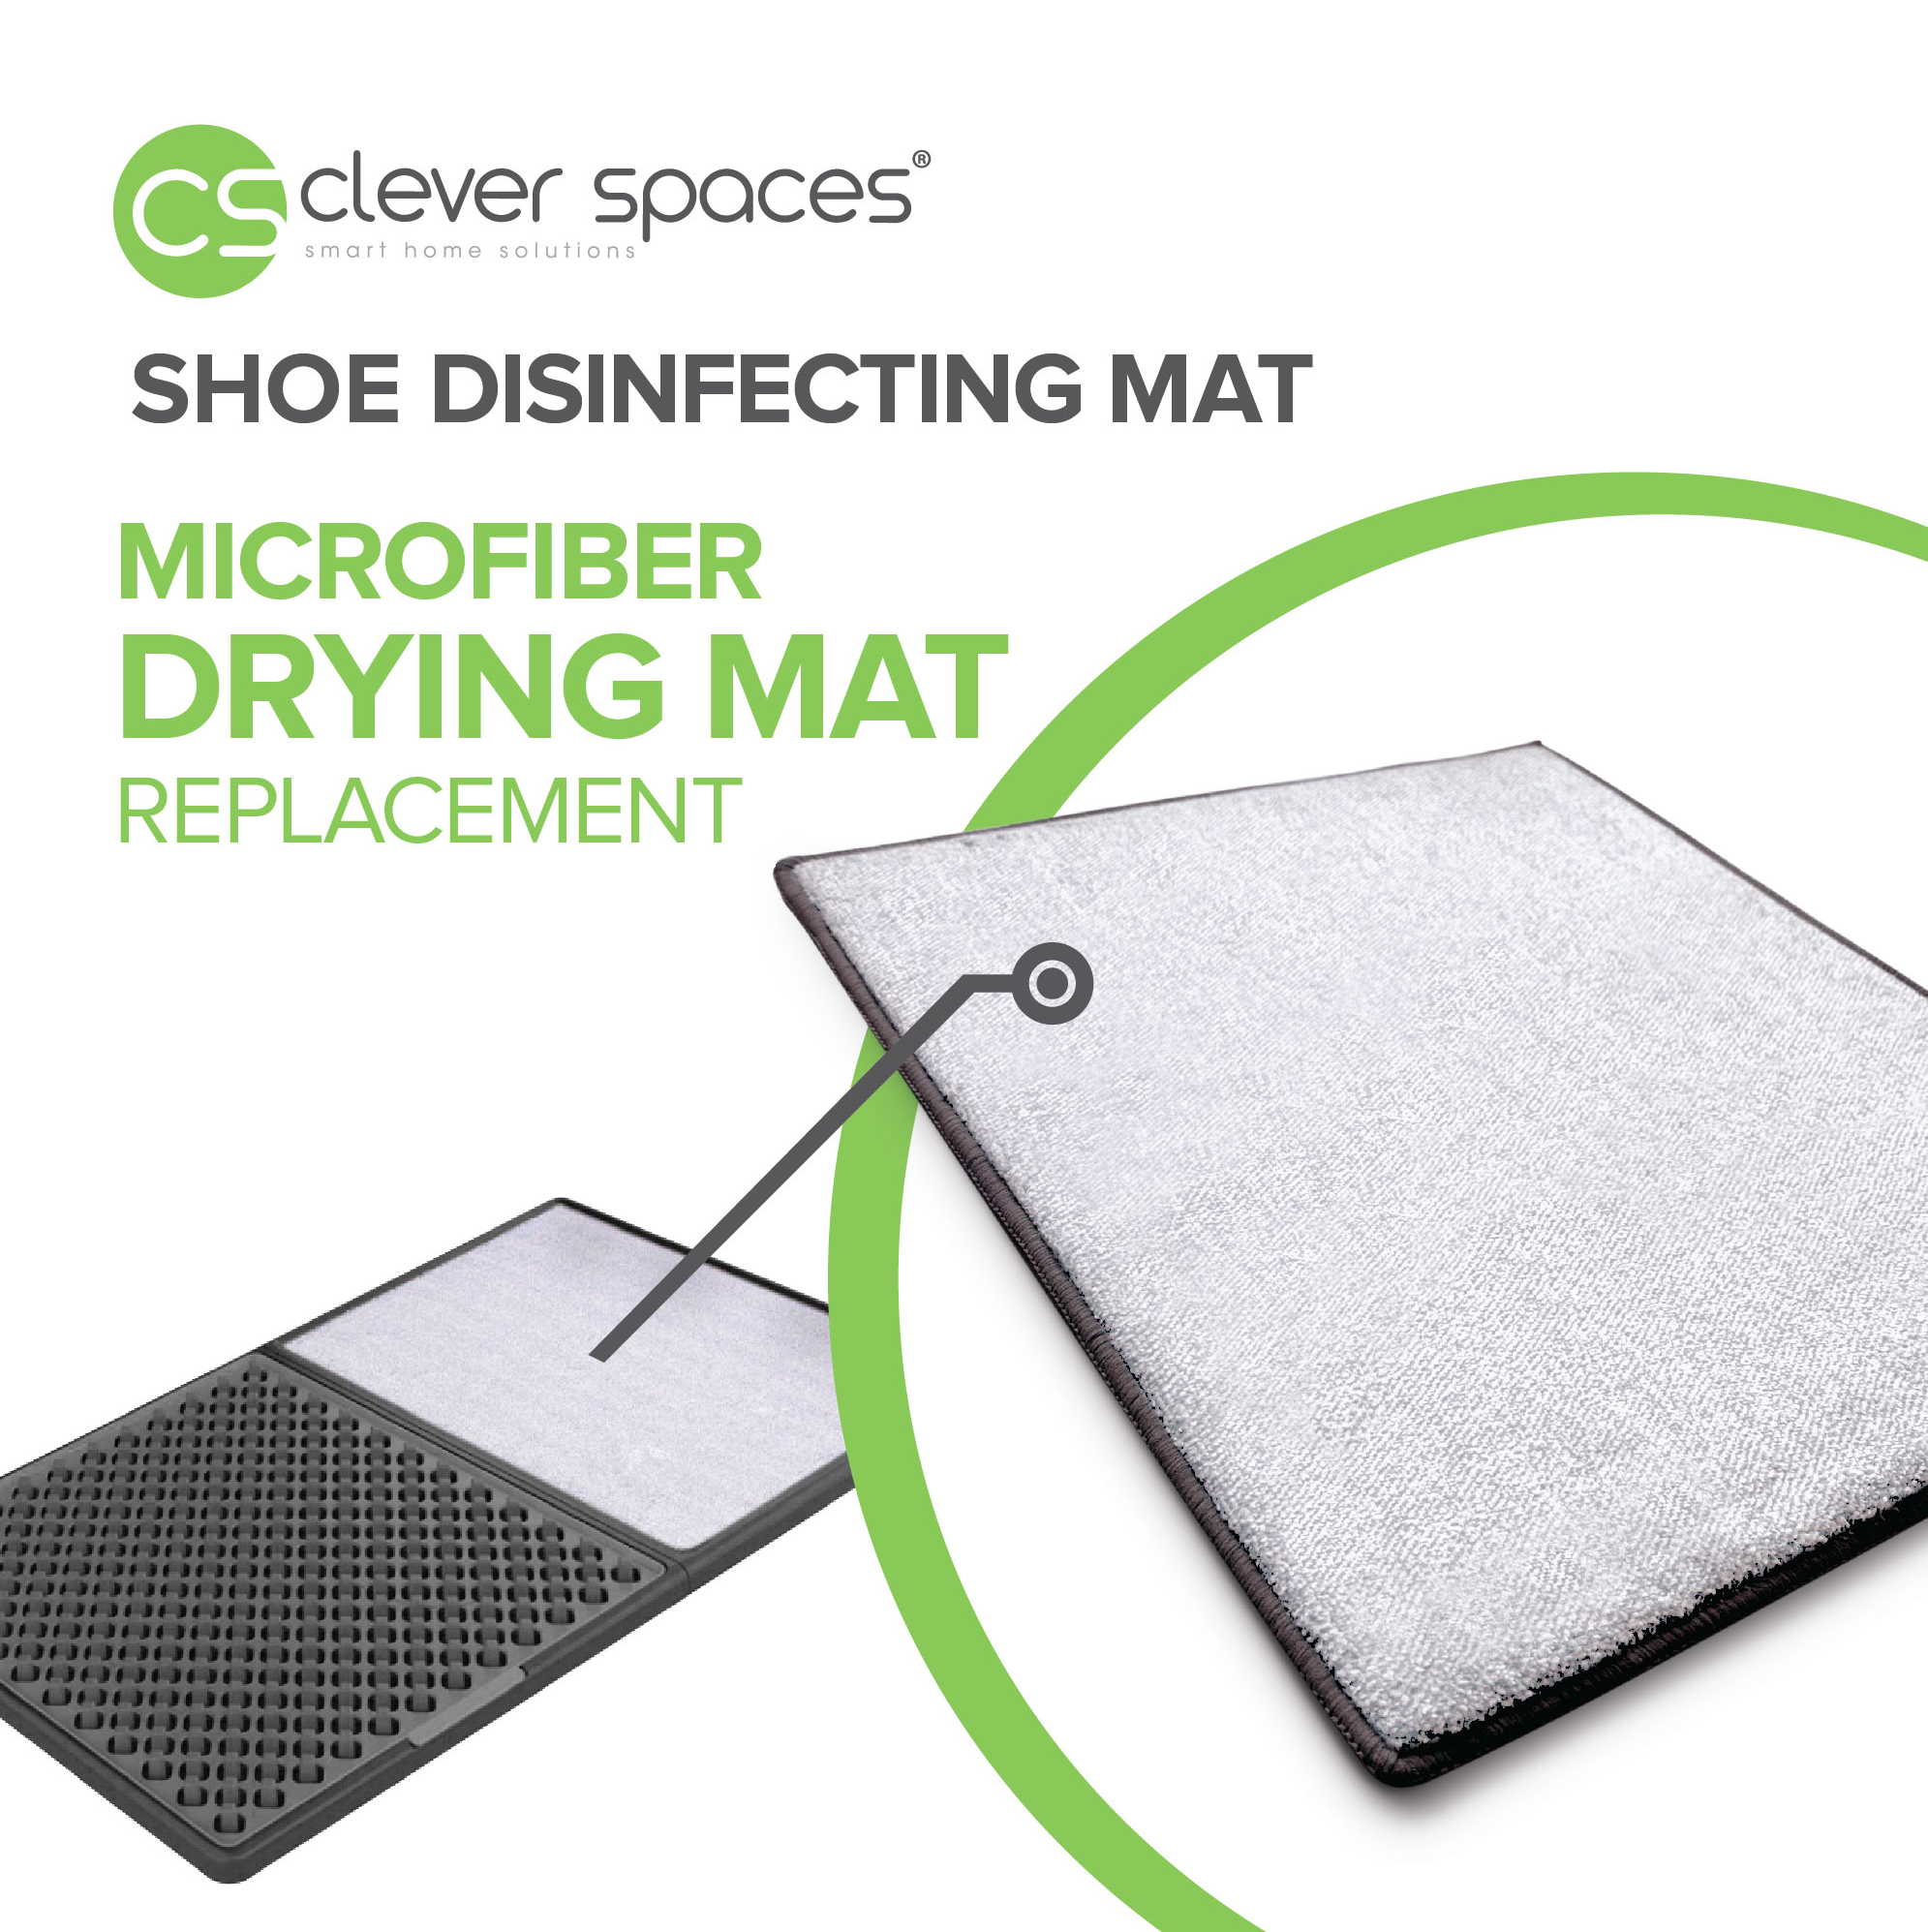 Clever Spaces Microfiber Mat